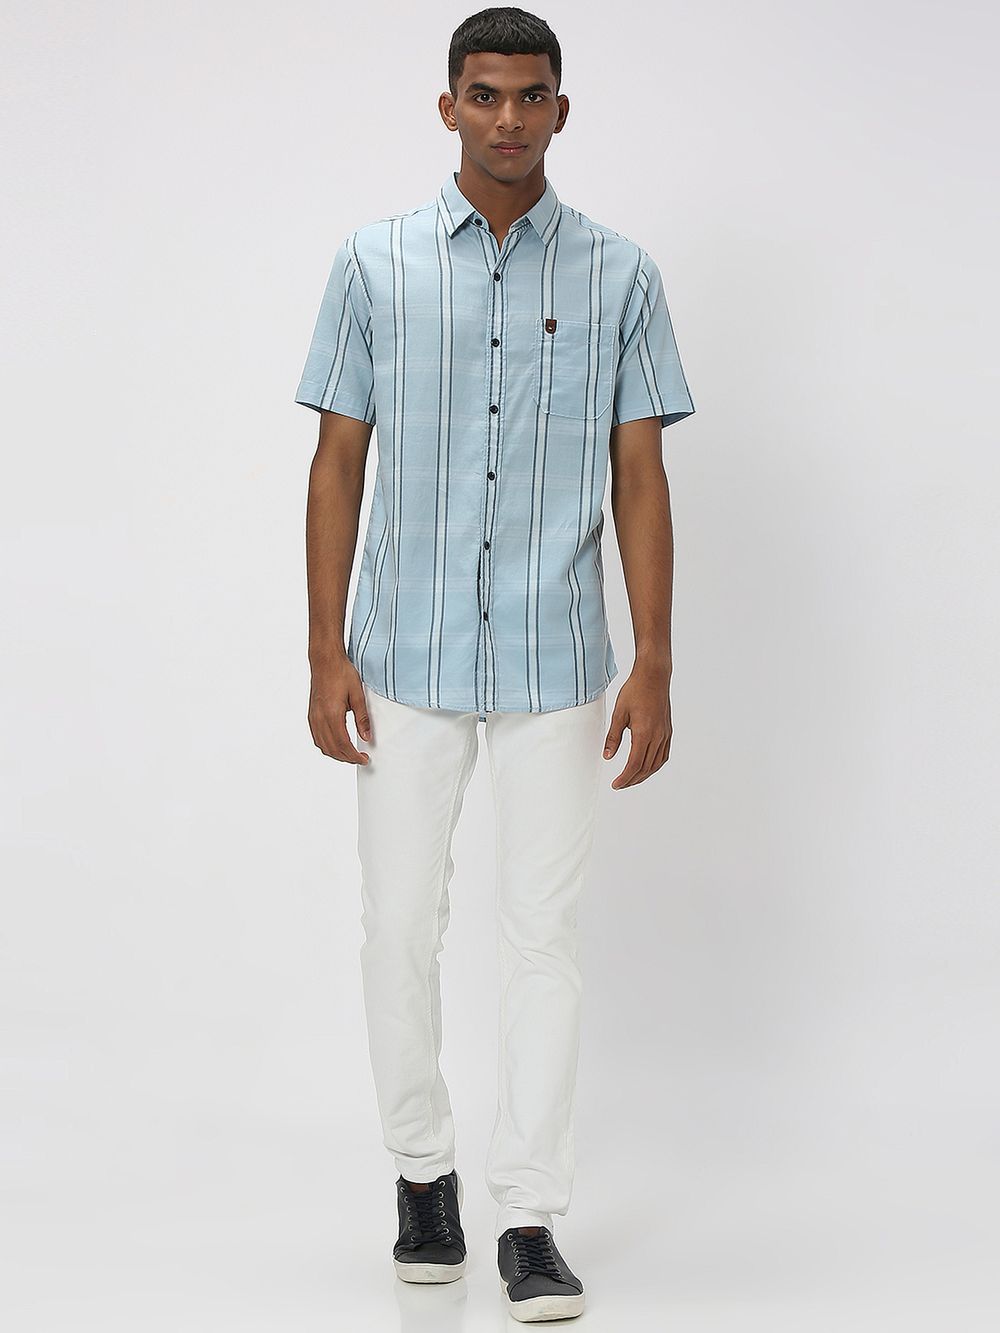 Light Blue & White Large Check Slim Fit Casual Shirt